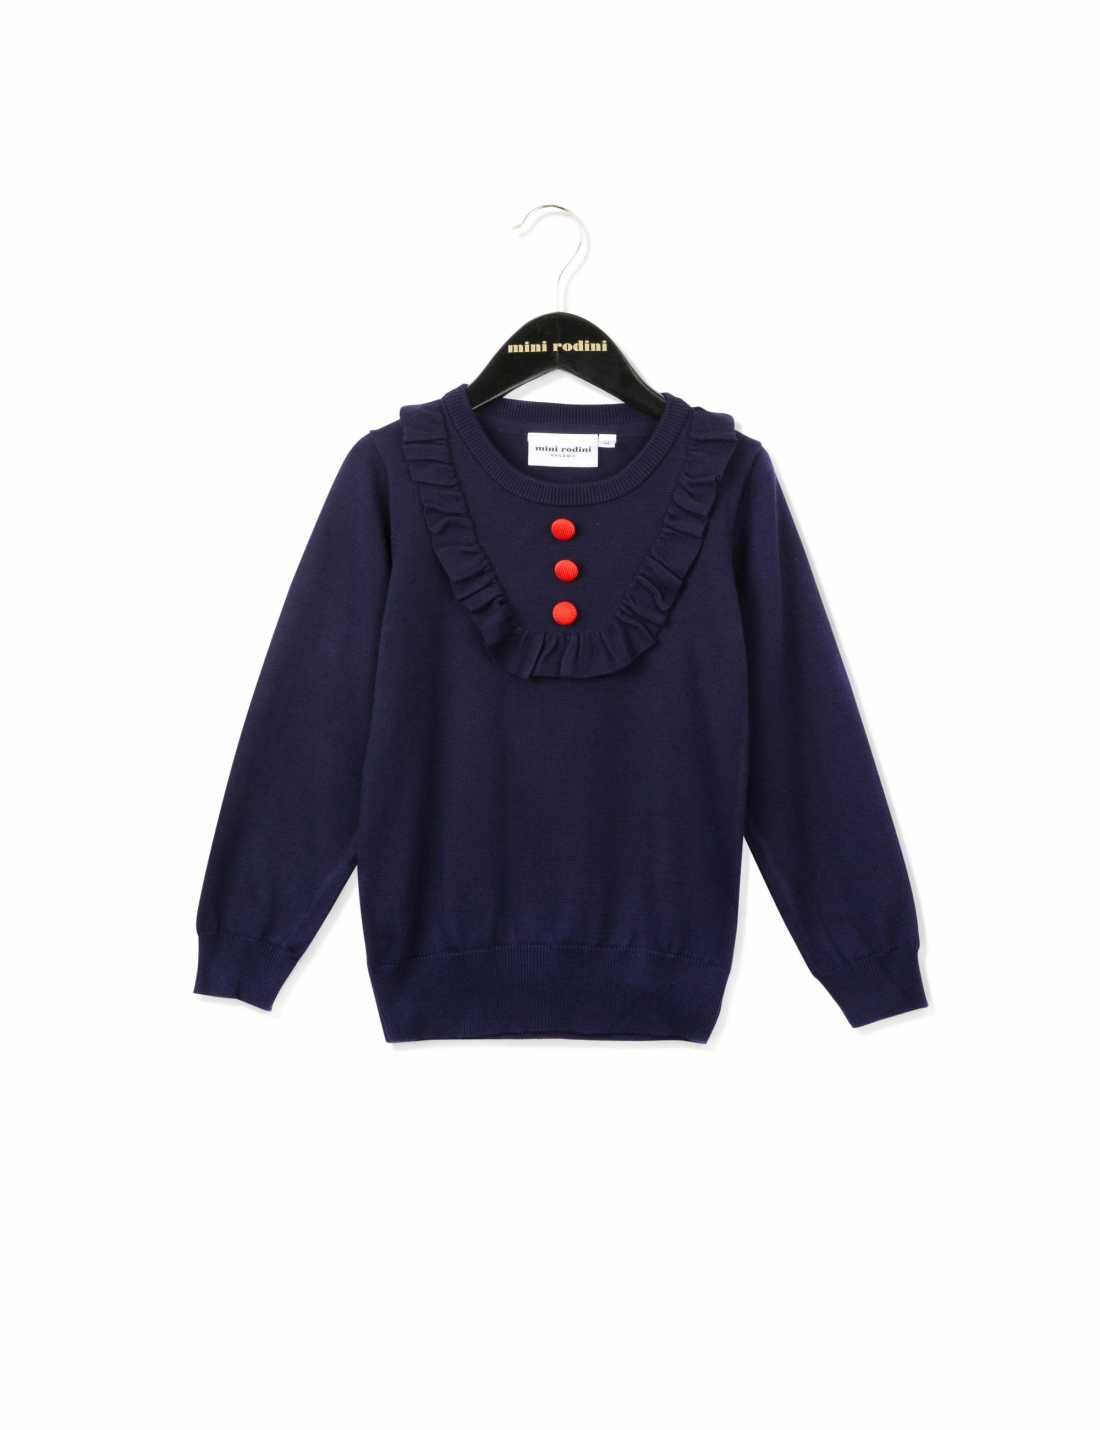 Baby Girls Navy Blue Knitted Frilly Trims Sweater - CÉMAROSE | Children's Fashion Store